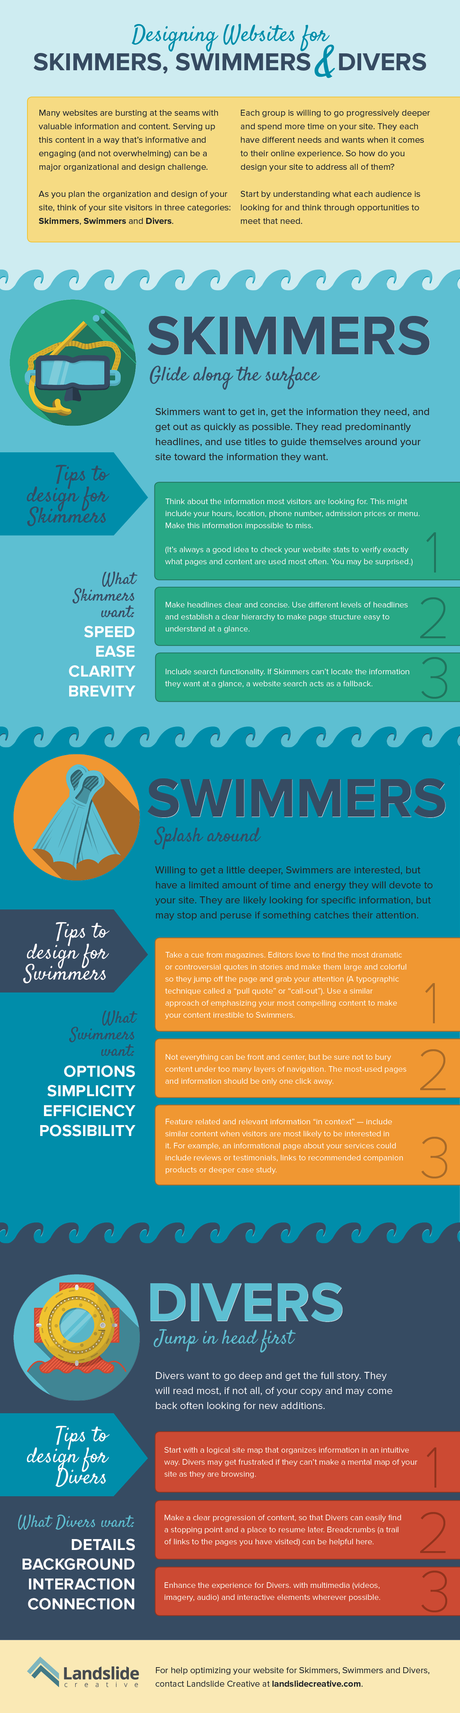 Skimmers, swimmers y divers